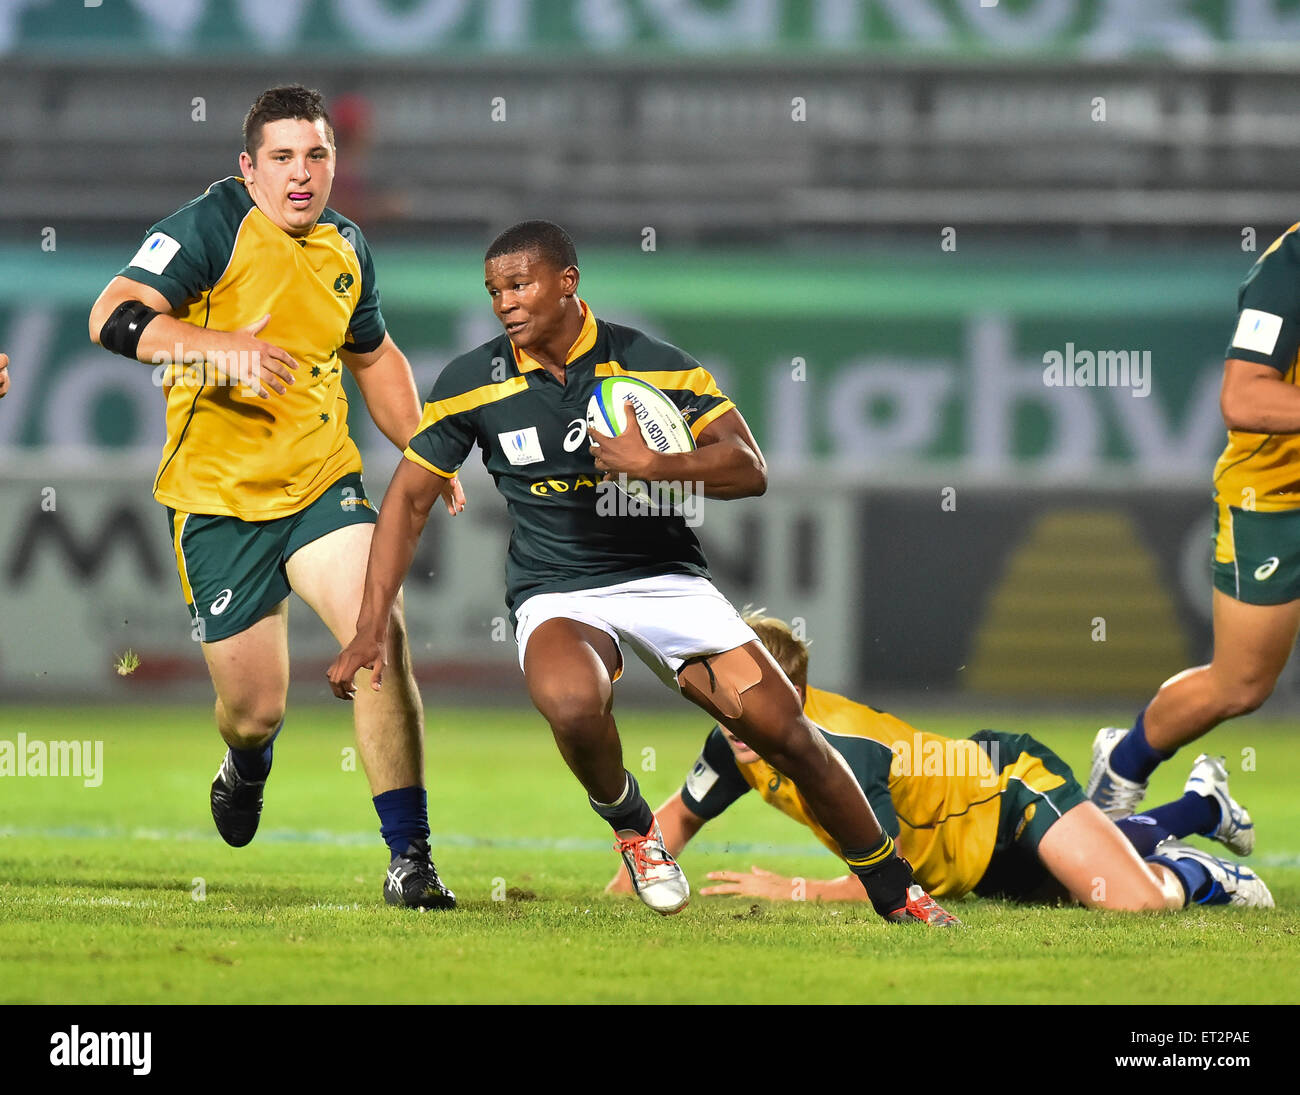 South Africa versus Australia at the World Rugby Under 20 Championship in 2015 Stock Photo